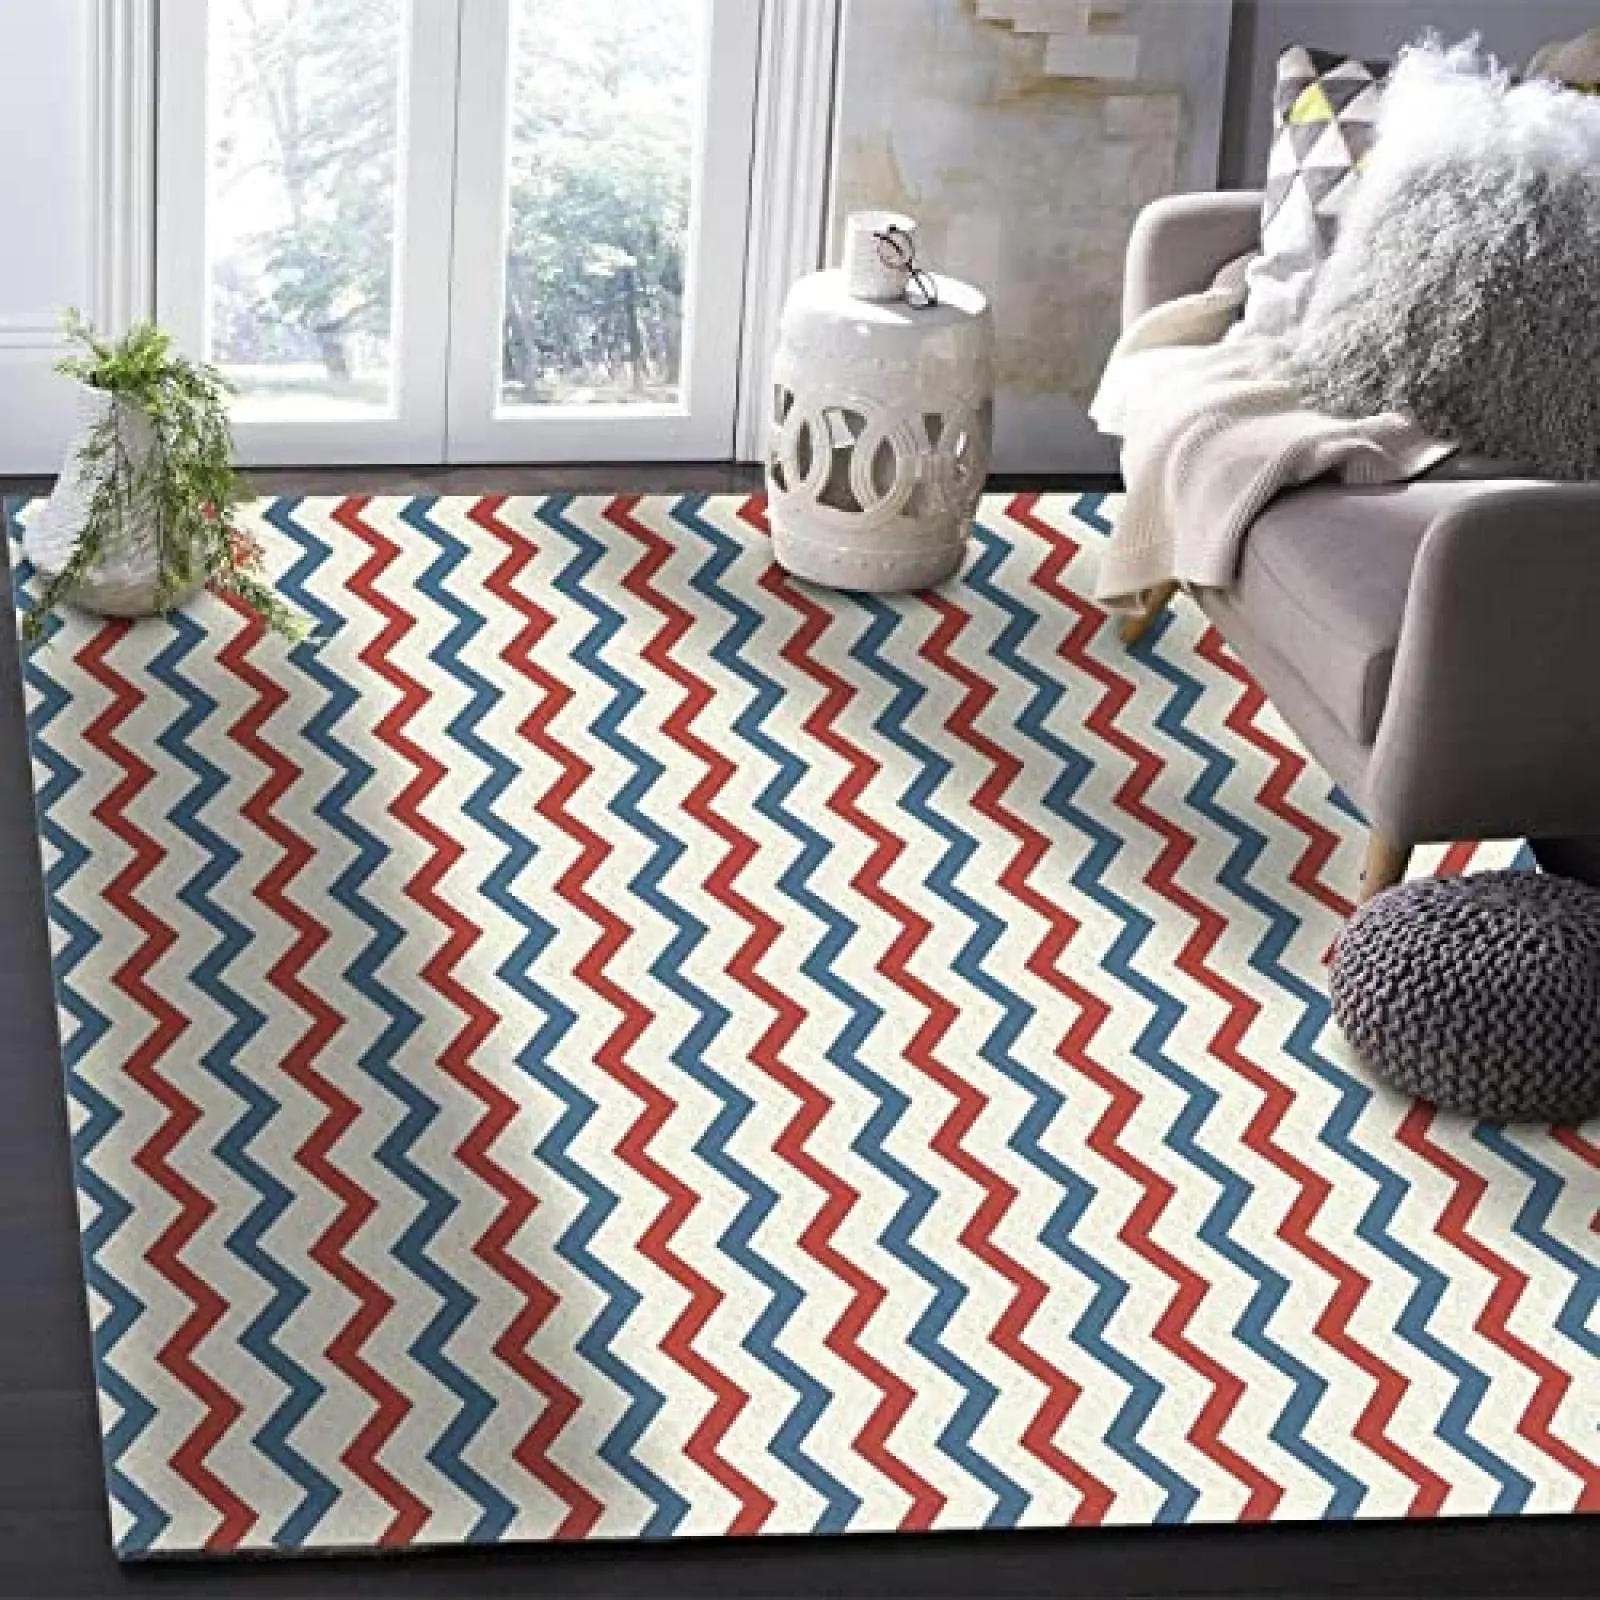 

CLOOCL Minimalist Striped Carpets Flannel Material 3D Printed Rugs for Living Room Bedroom Area Rug Fashion Mats Dropshipping